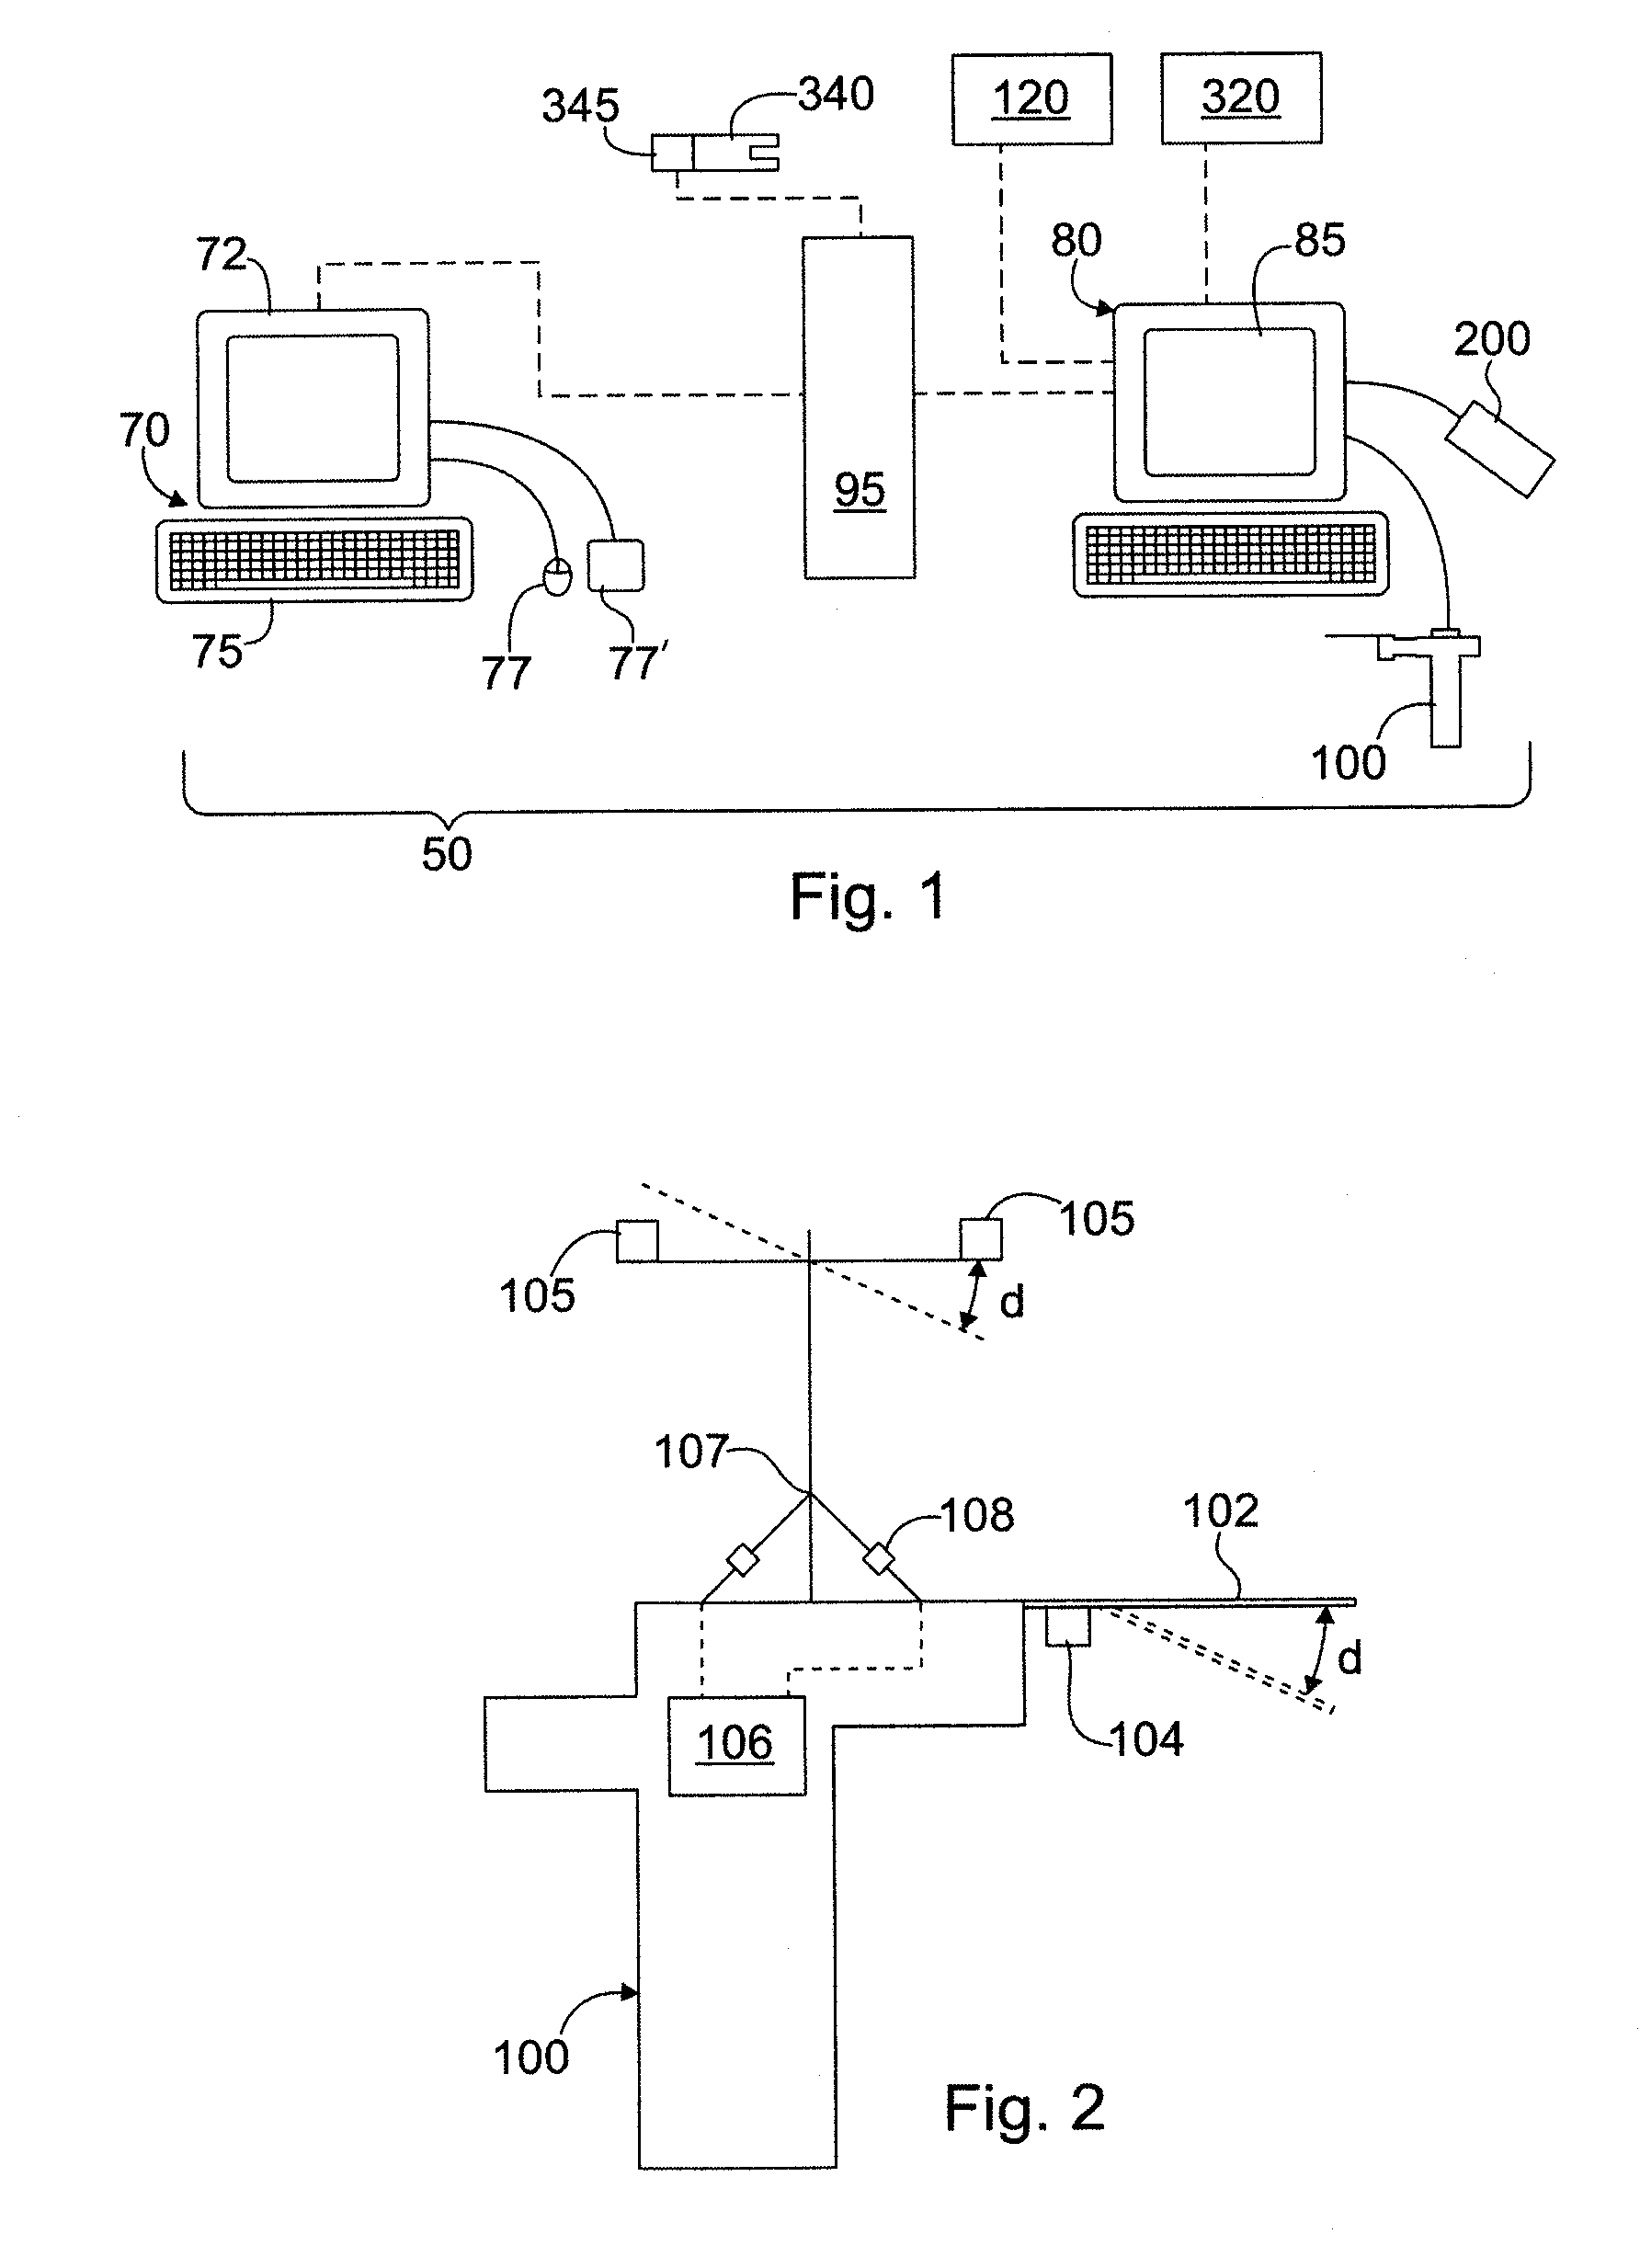 Method and Apparatus for Computer Aided Surgery